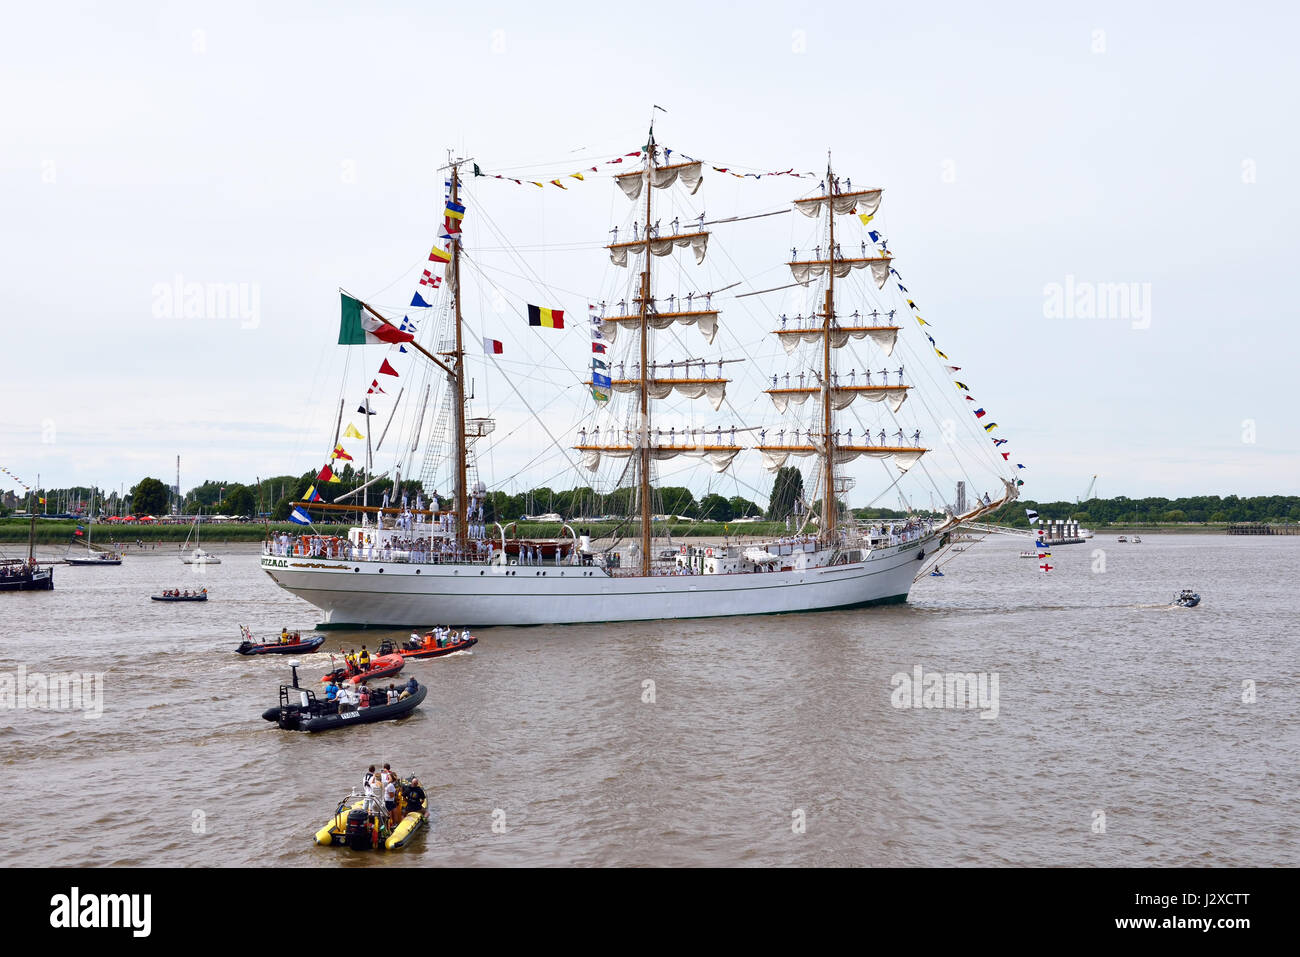 Mexican tall ship starts departure during last day of Tall Ships Races 2016 on July 10, 2016 in Antwerp, Belgium Stock Photo